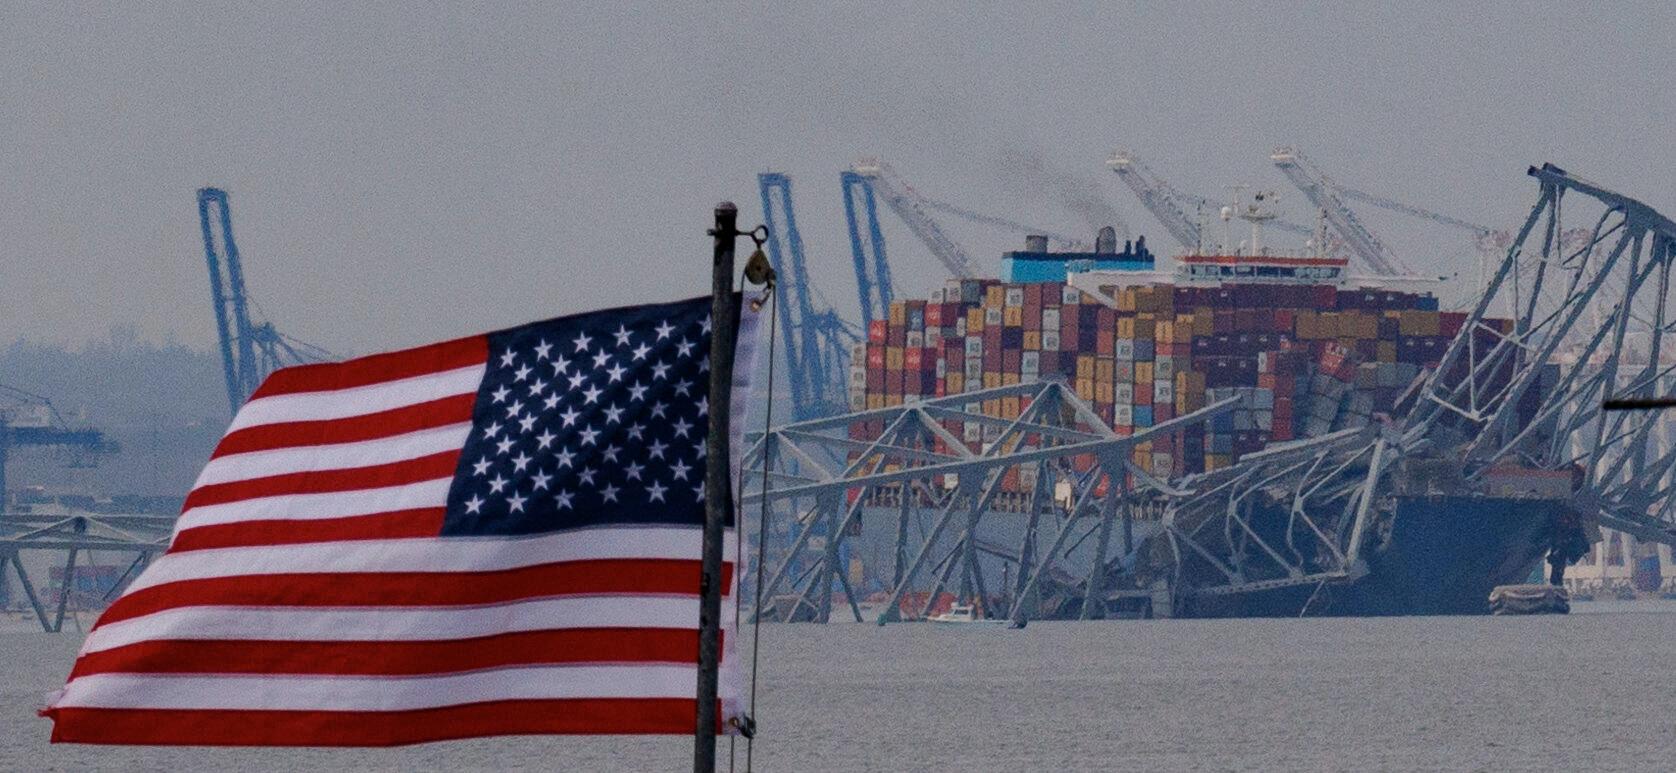 Baltimore Bridge Collapse Allegedly Not Giant Cargo Ship’s First Rodeo